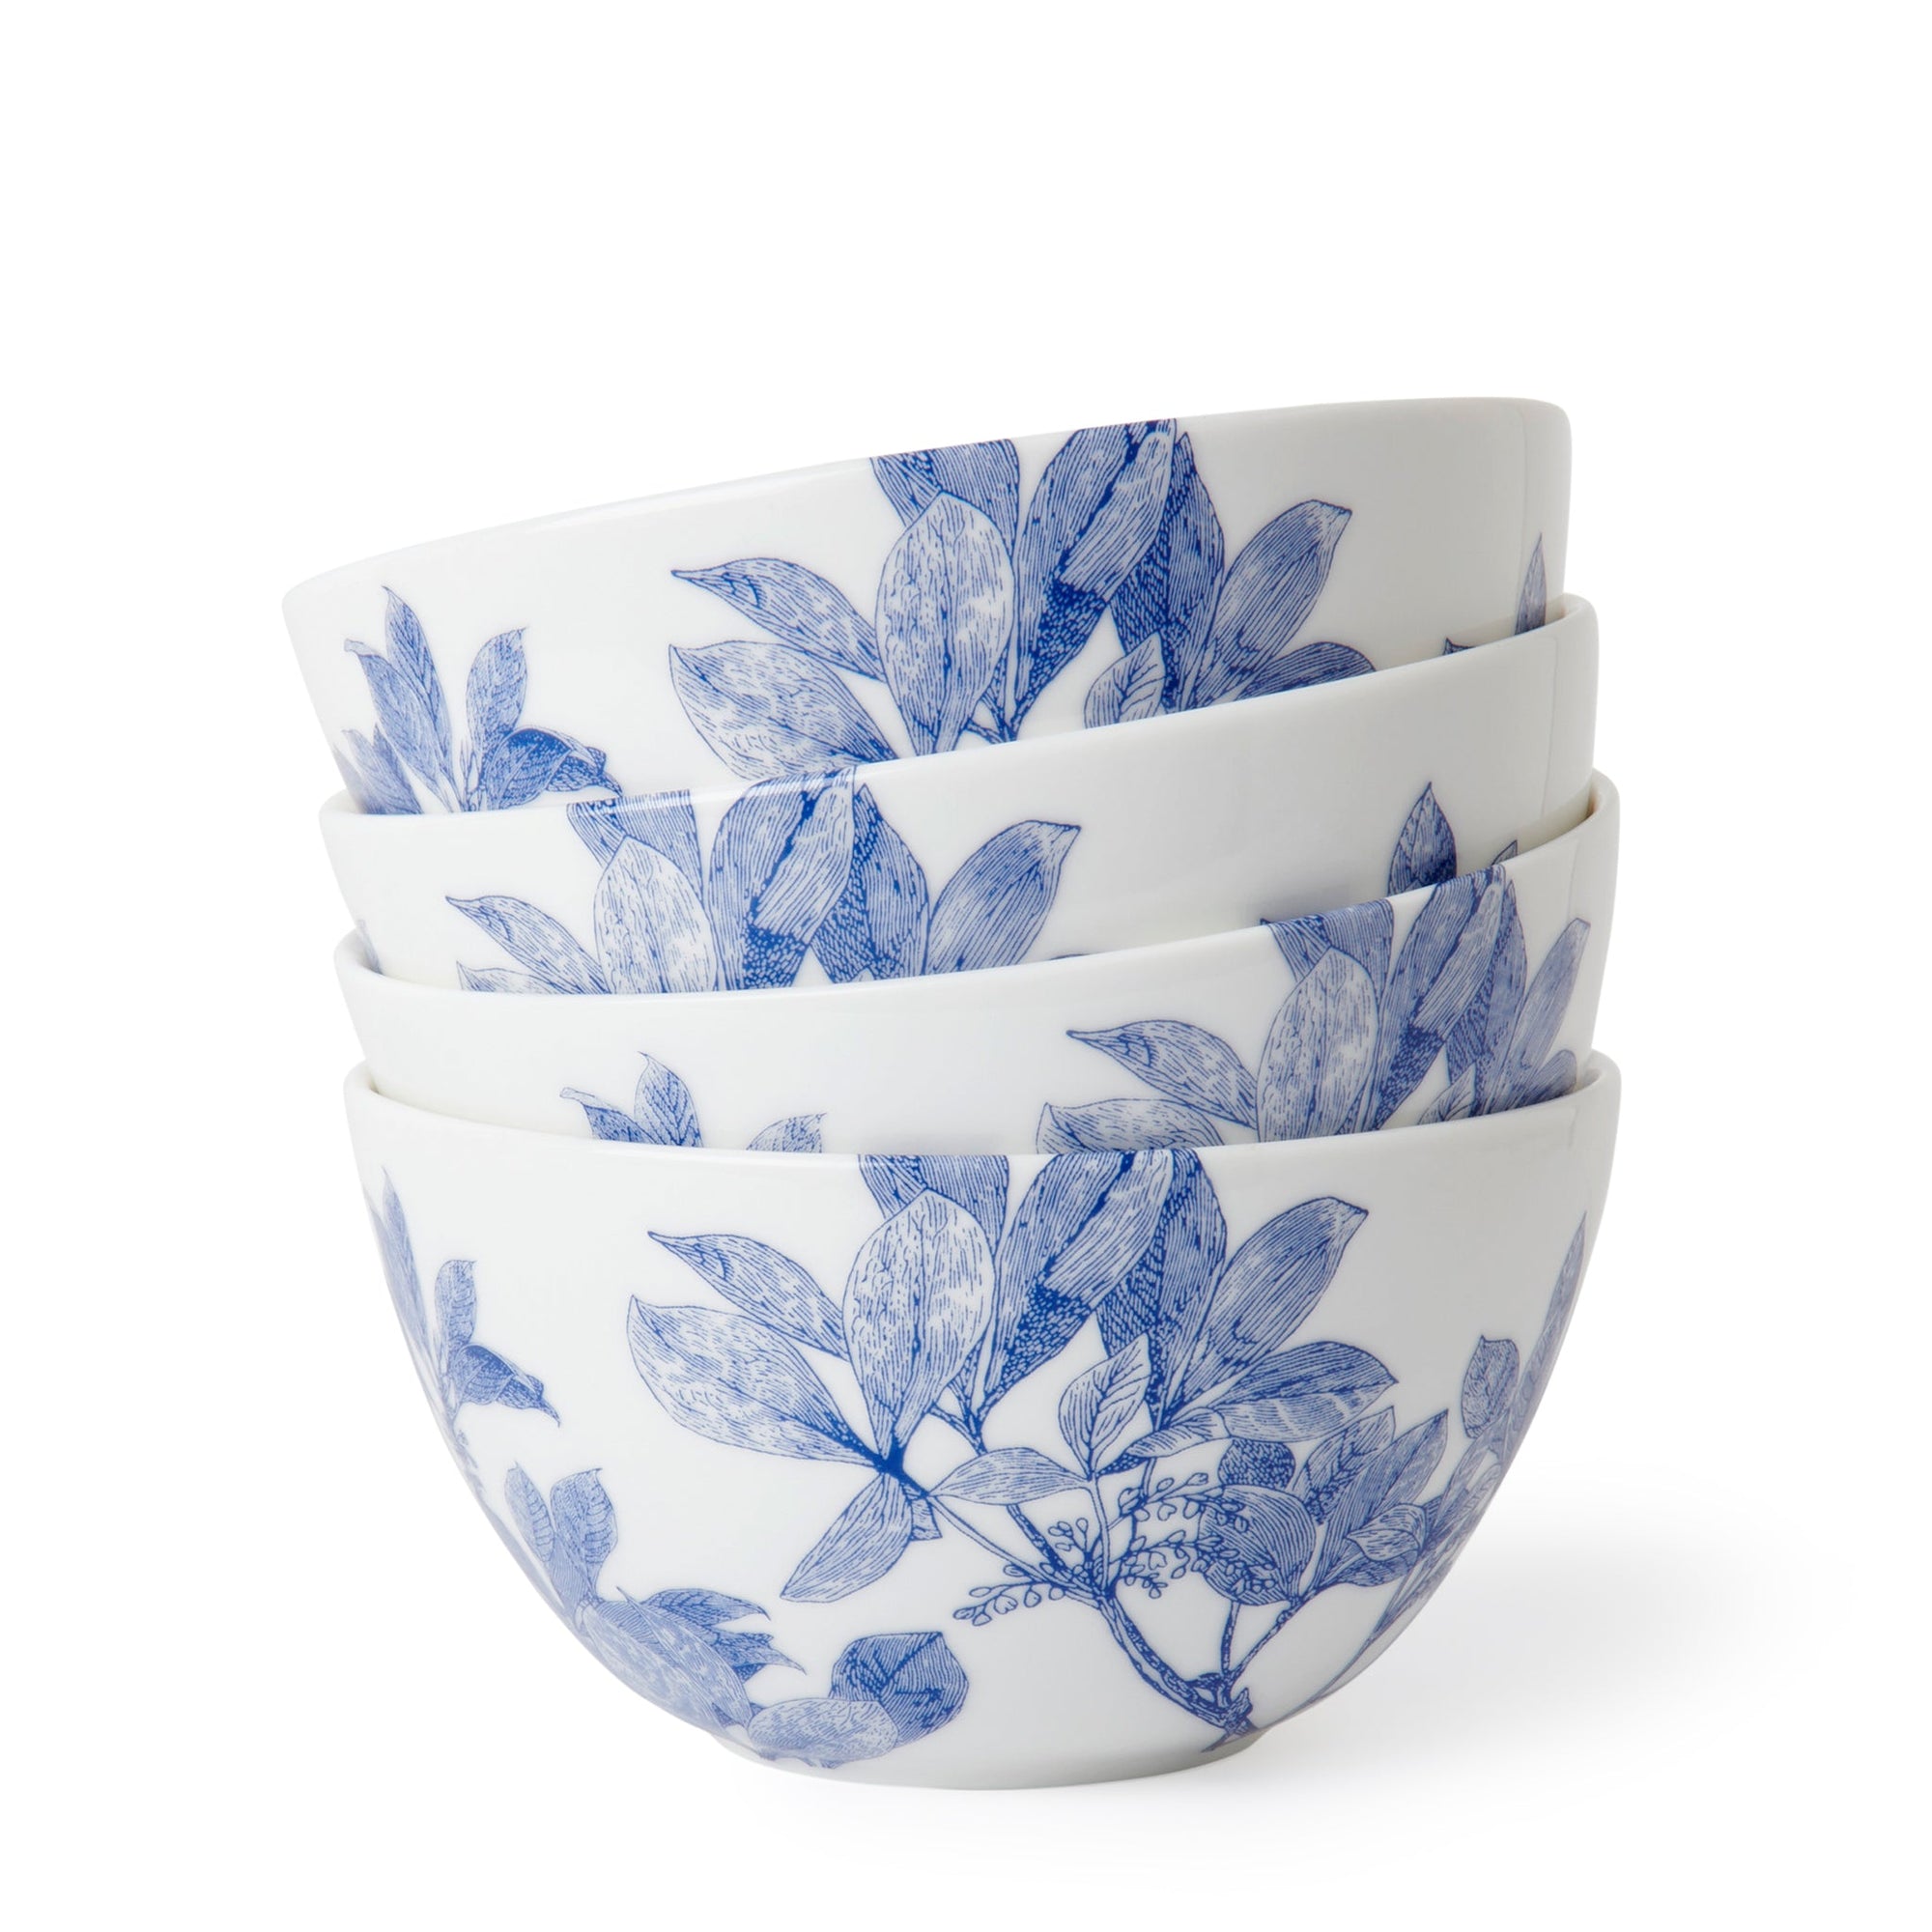 Arbor Blue Tall Cereal Bowl, Set of 4